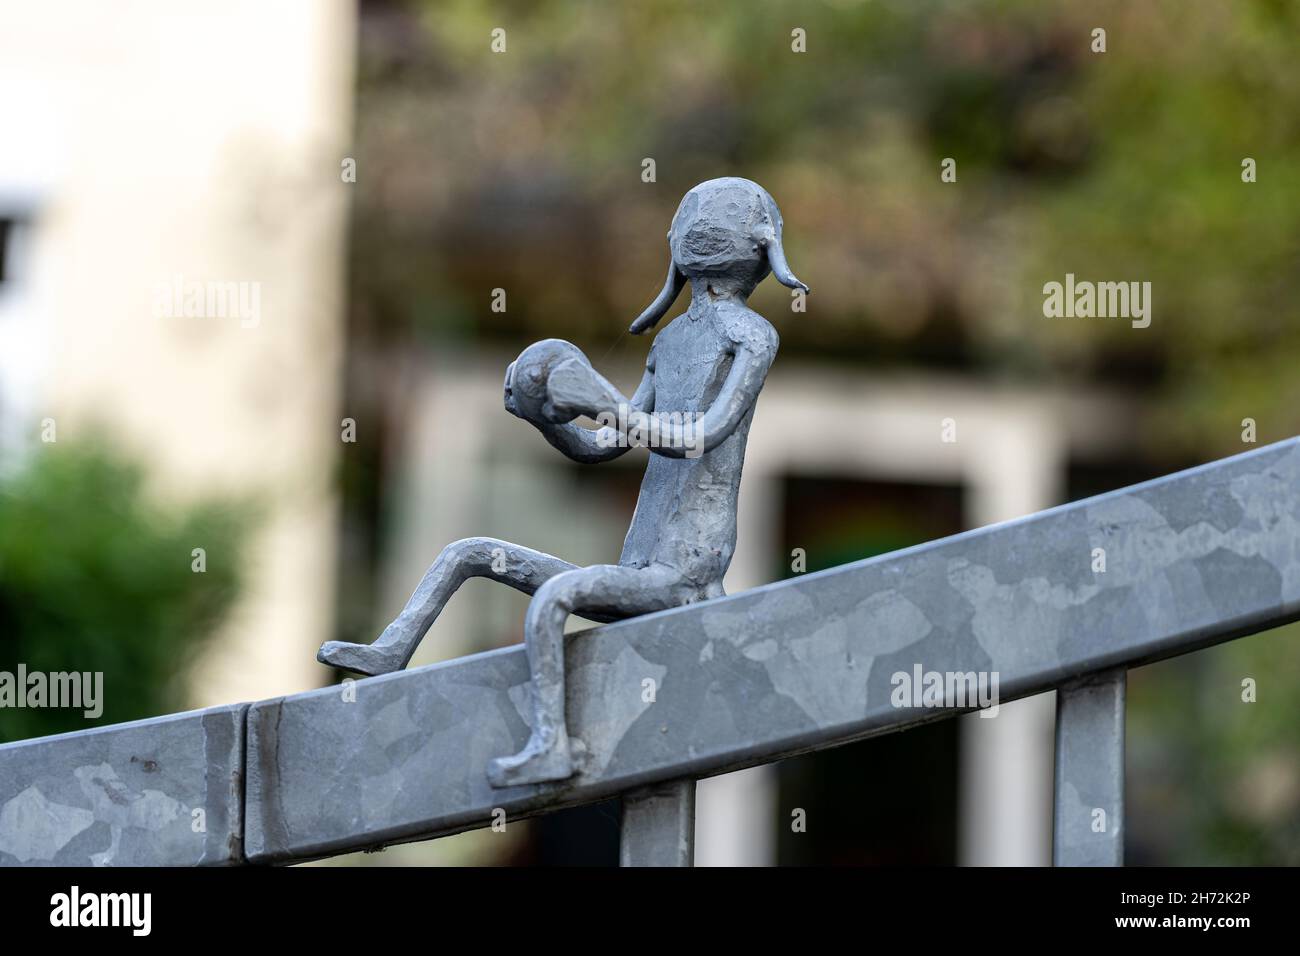 Little figures made of steel on a metal fence in shape of playing kids Stock Photo